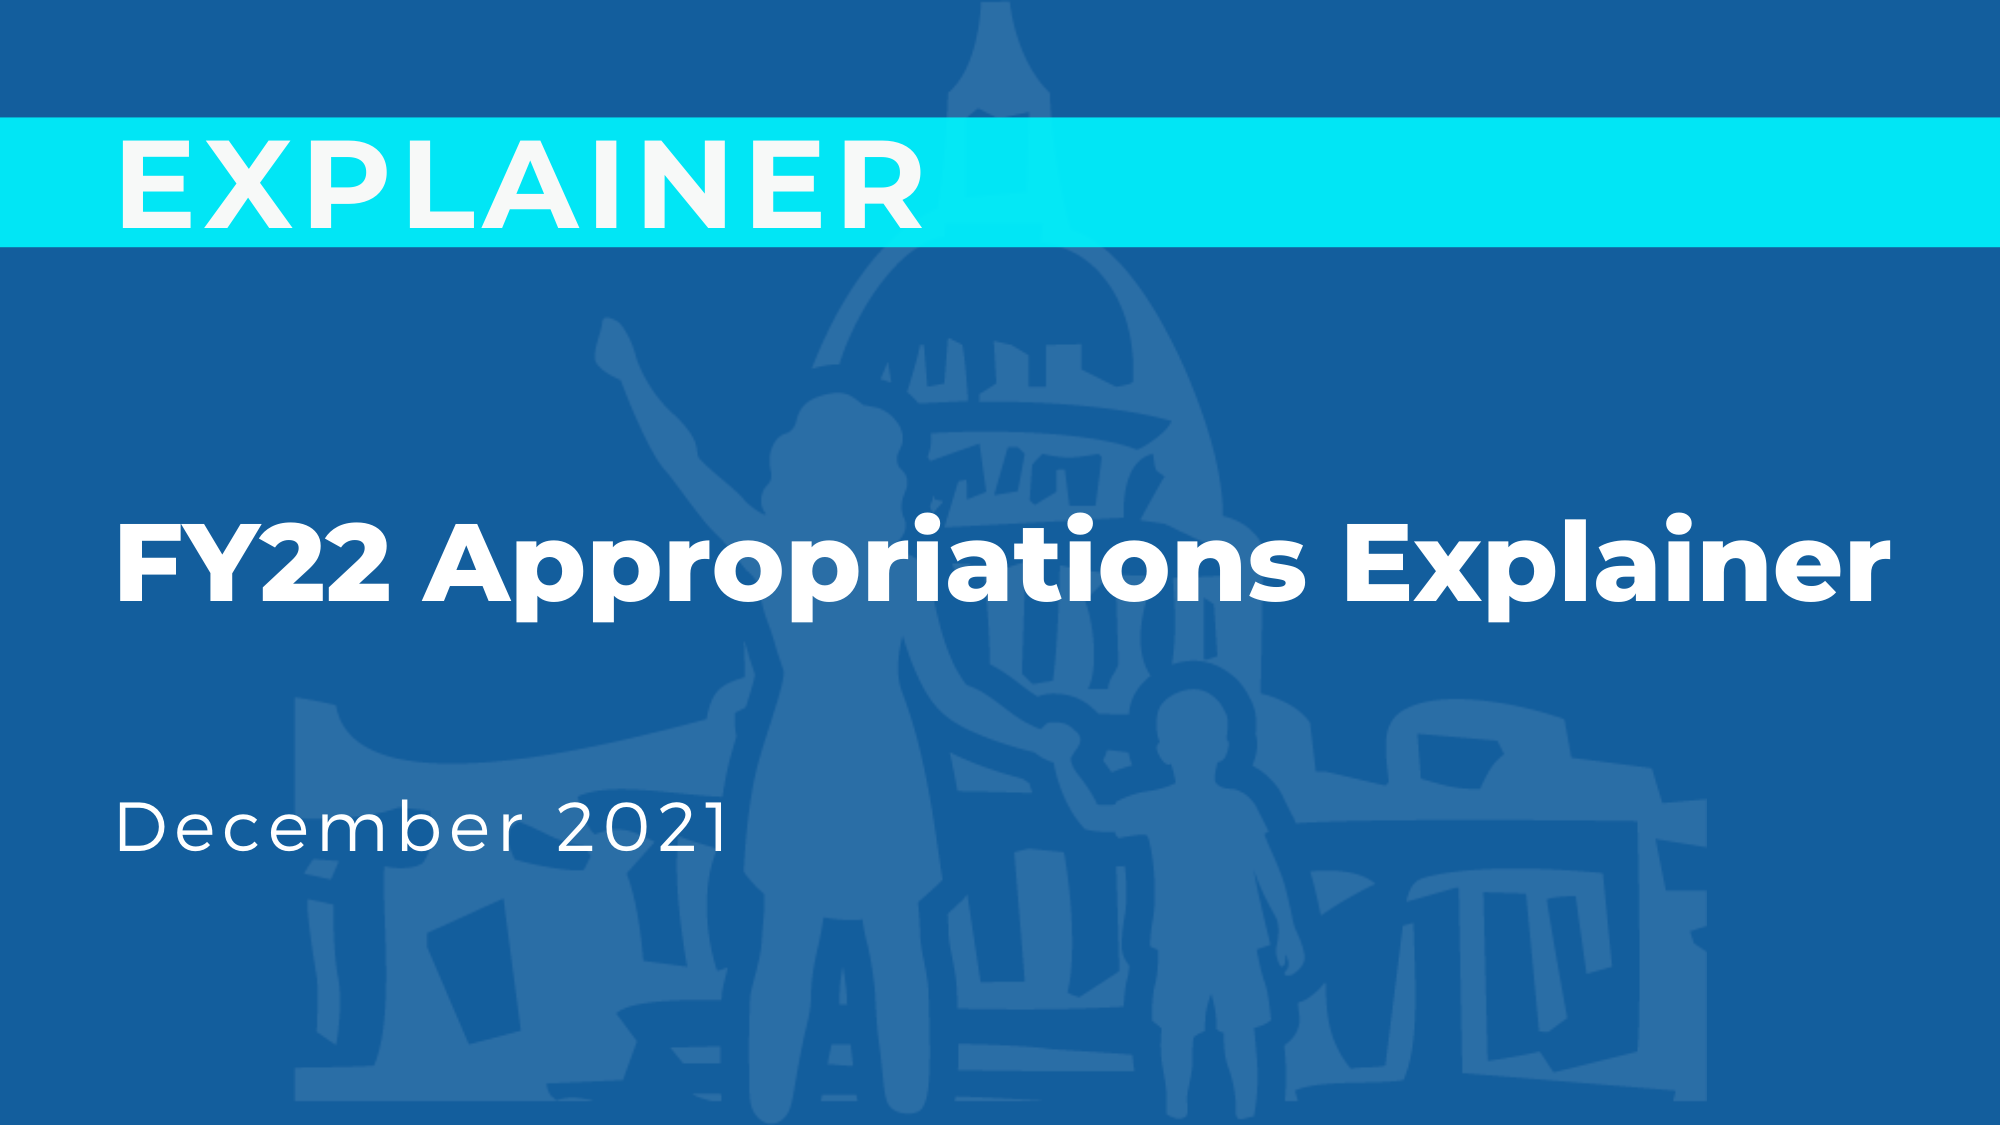 FY22 Appropriations Explainer